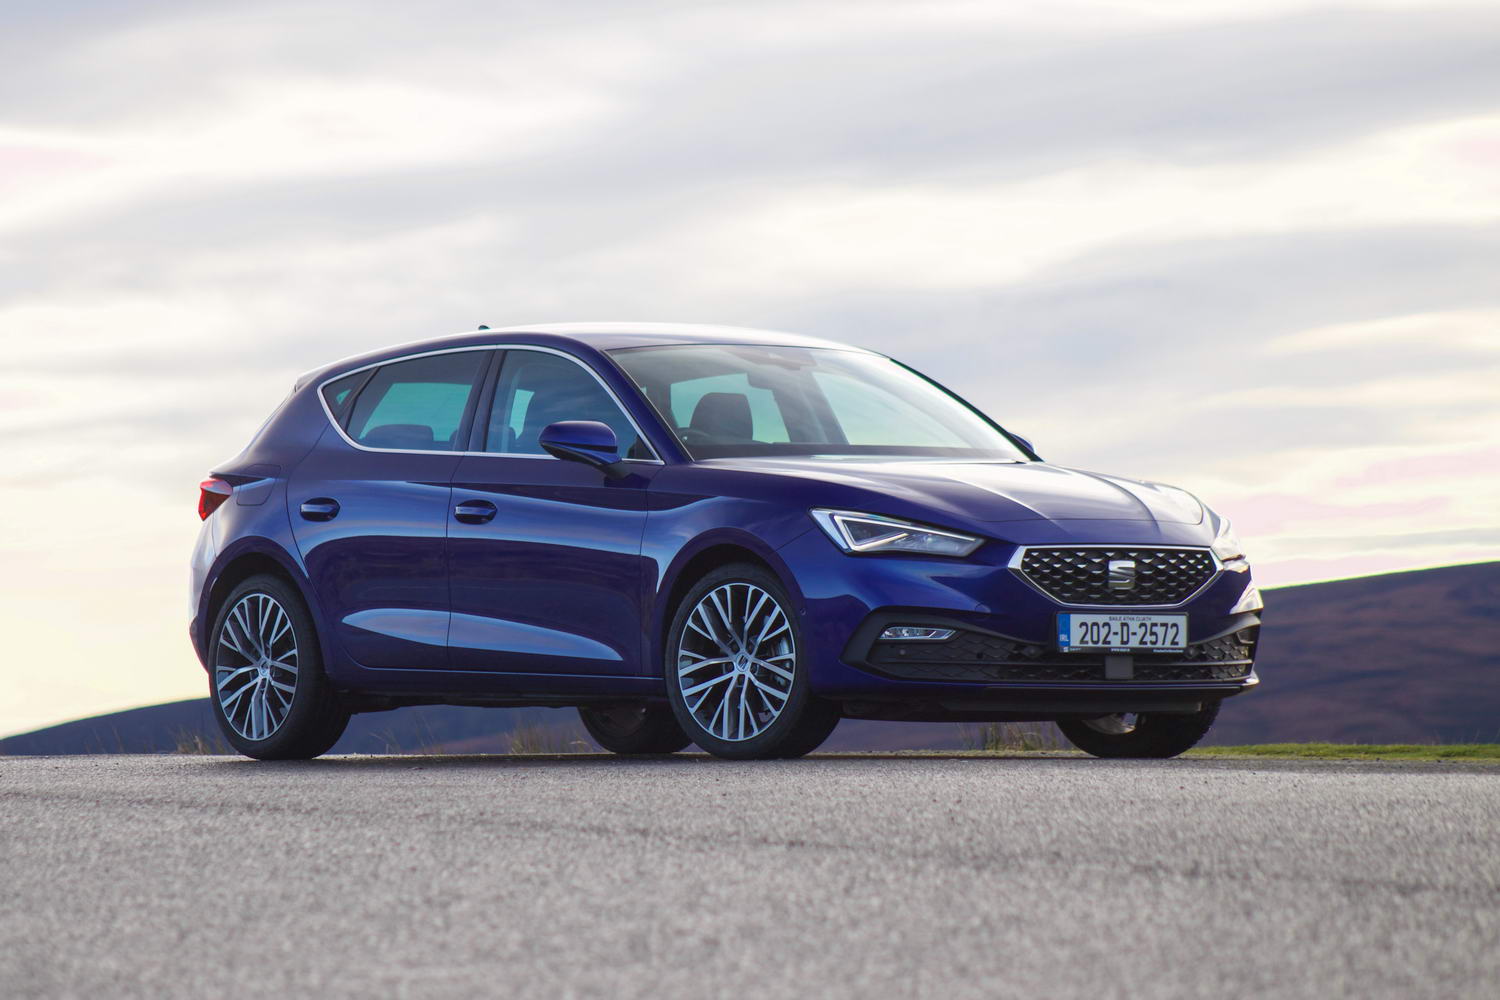 Car Reviews | SEAT Leon 1.5 TSI Xcellence (2020) | CompleteCar.ie